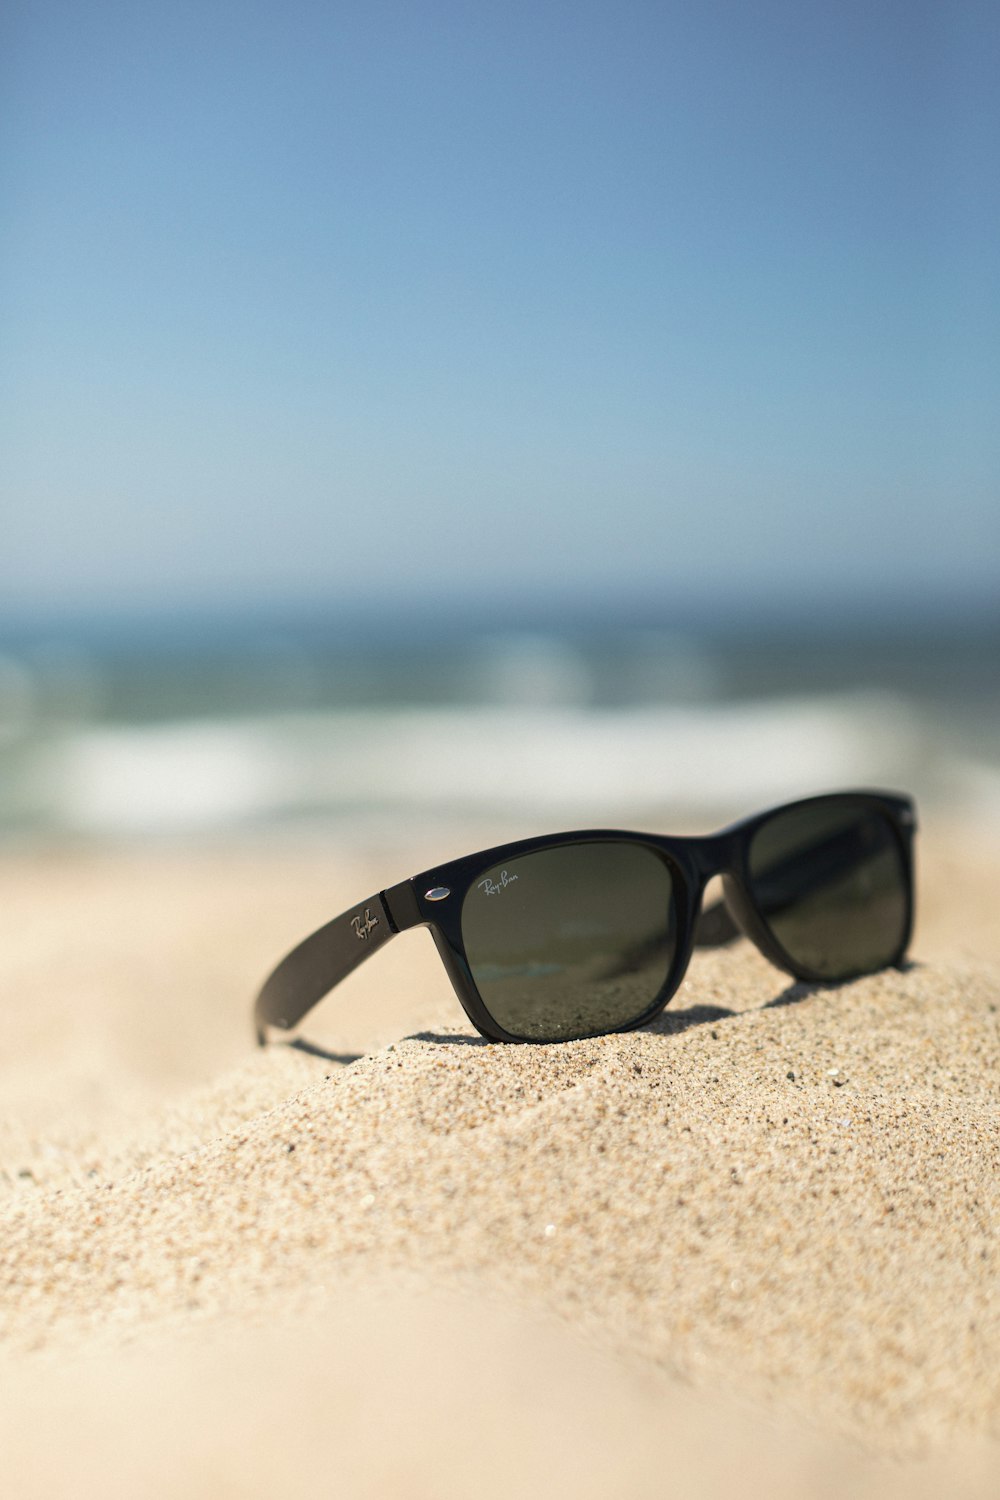 Sunglasses Beach Pictures | Download Free Images on Unsplash